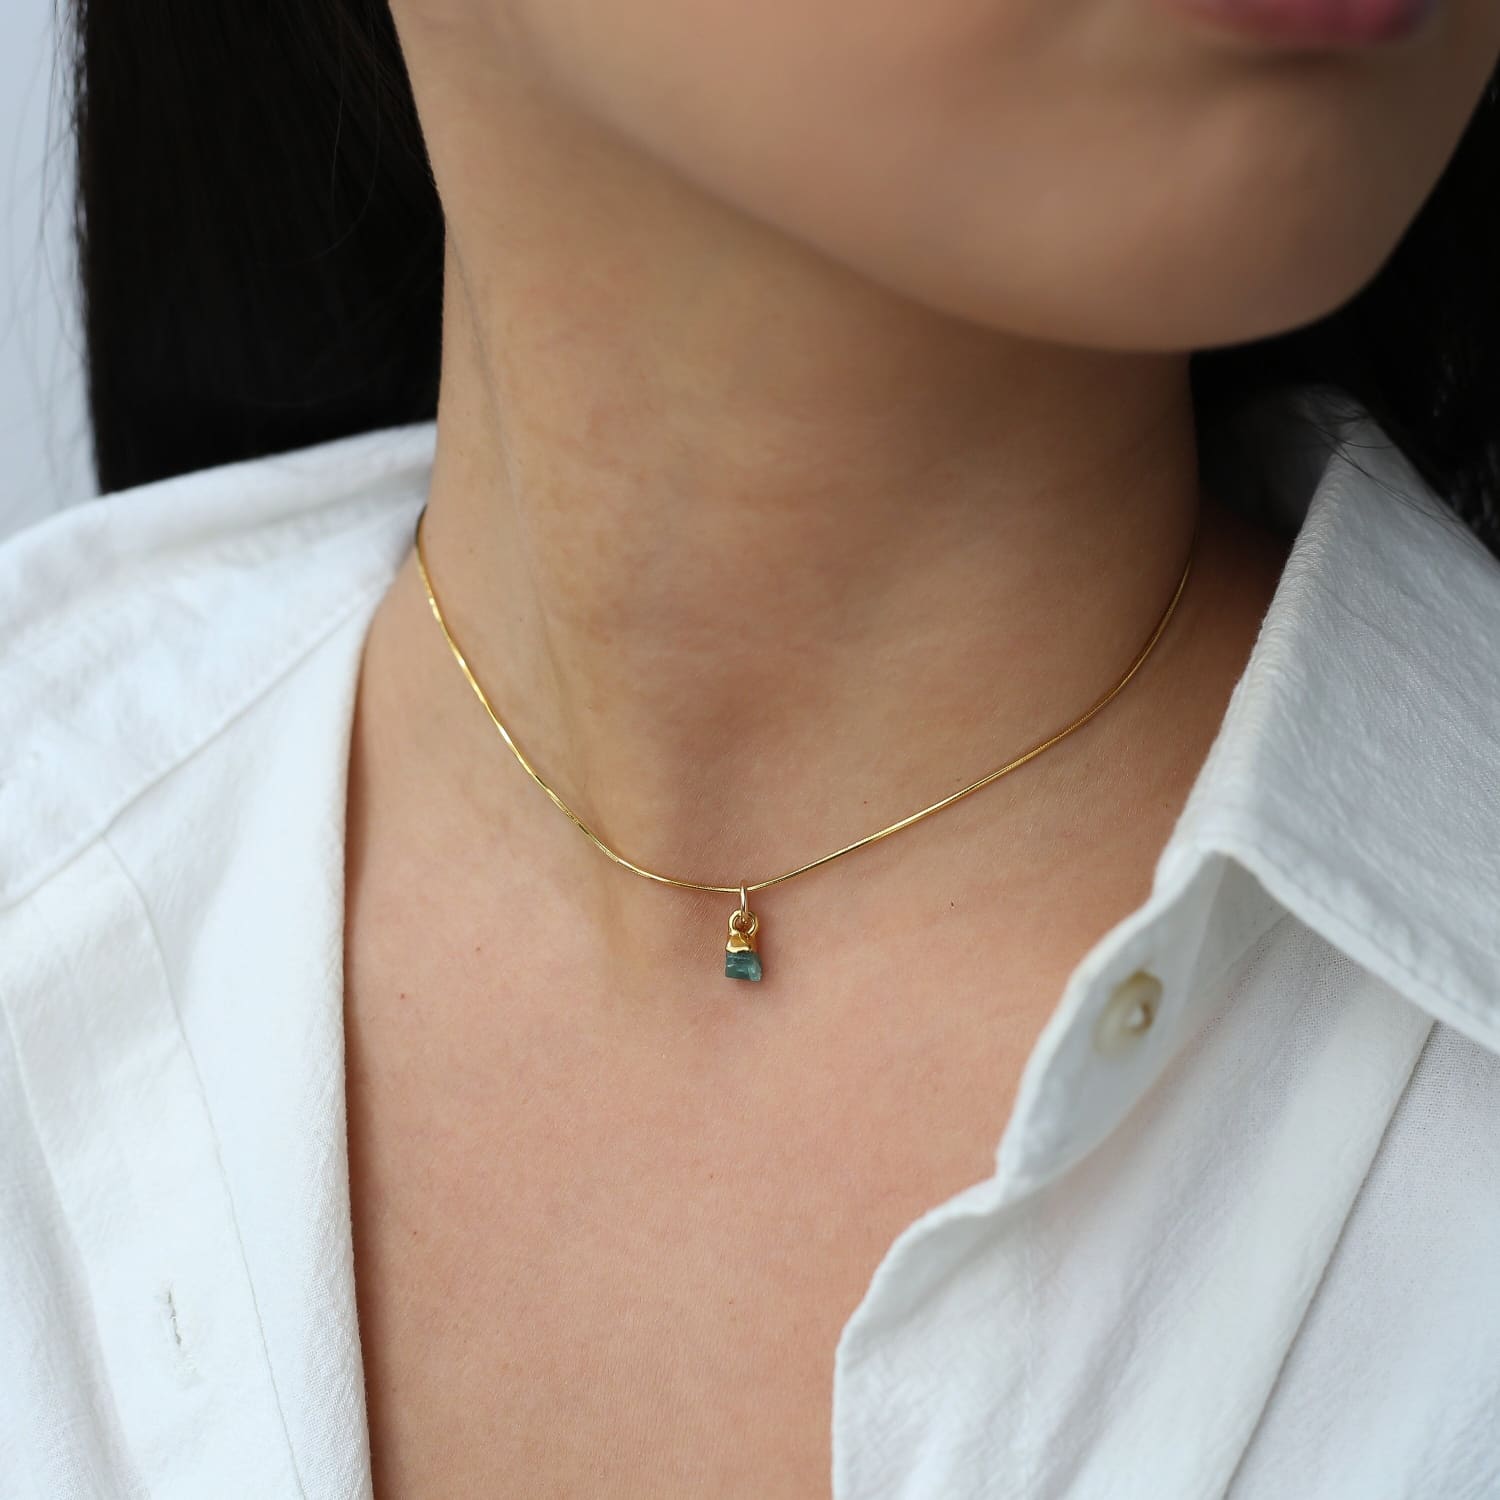 Moonstone Necklace With Gemstone Pendant Drop - 14k Gold Fill or Sterl –  Glass Palace Arts